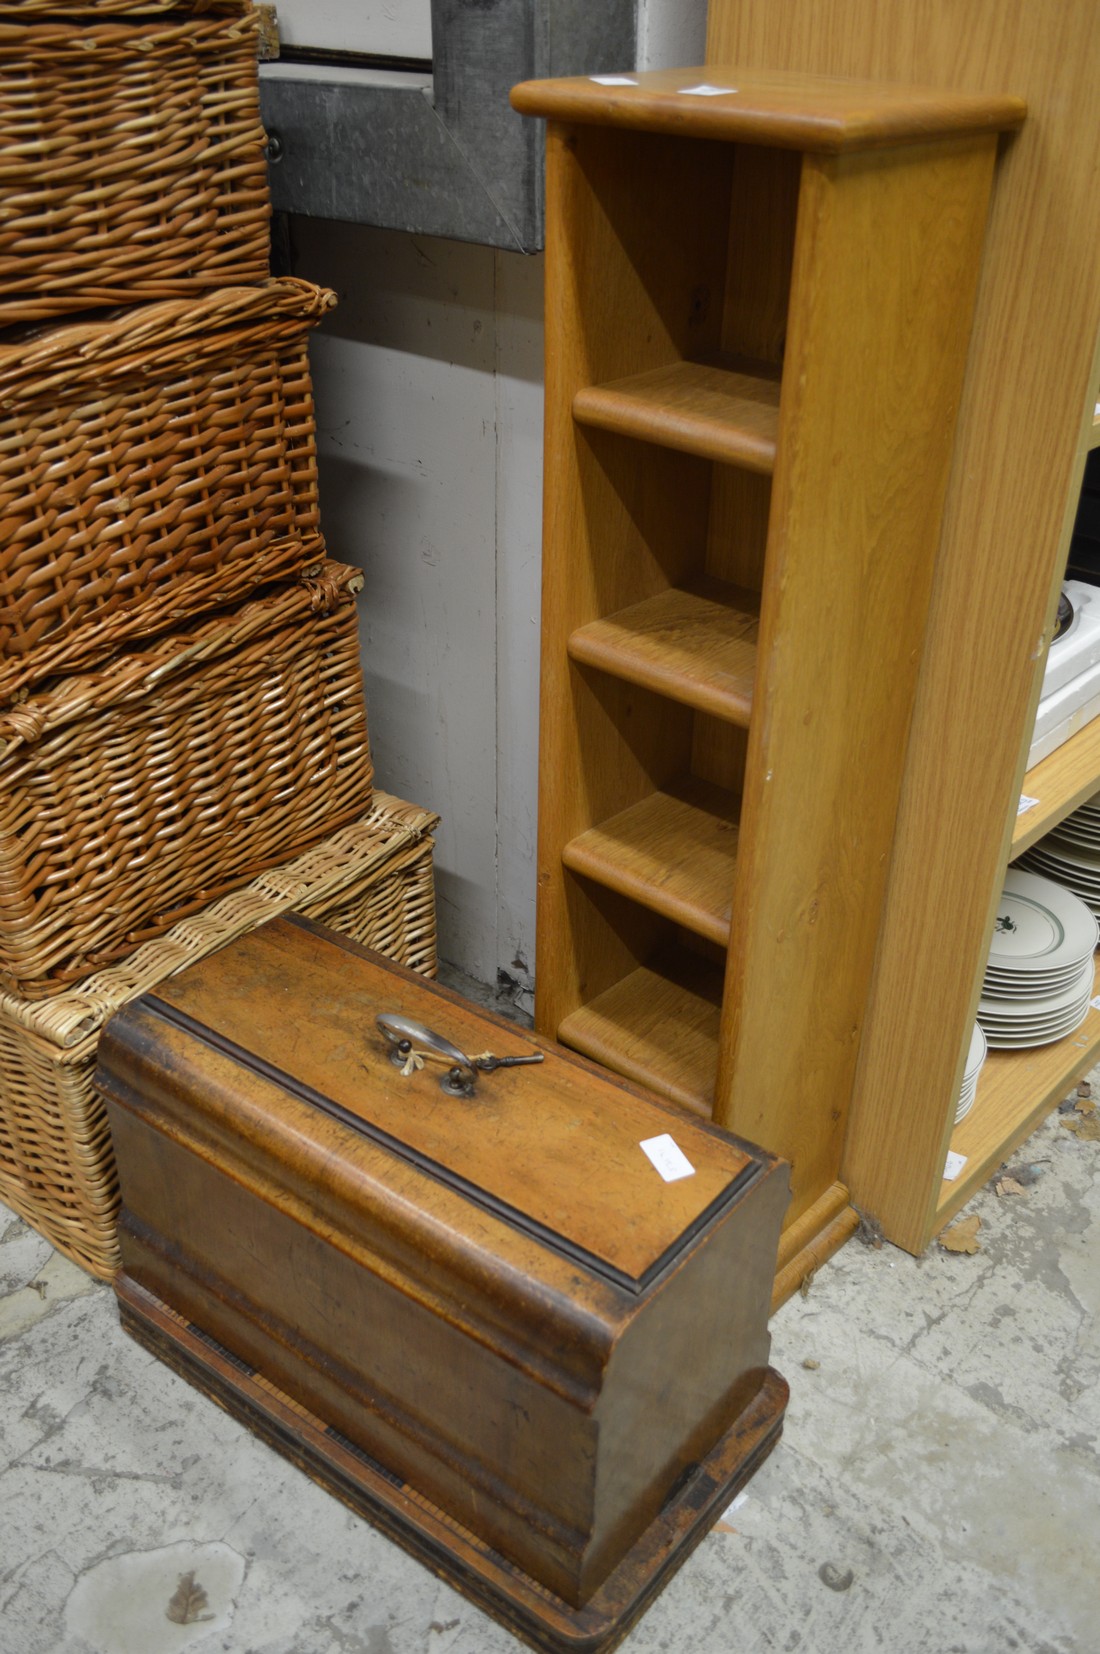 A narrow oak bookcase or CD rack and a sewing machine. - Image 2 of 2